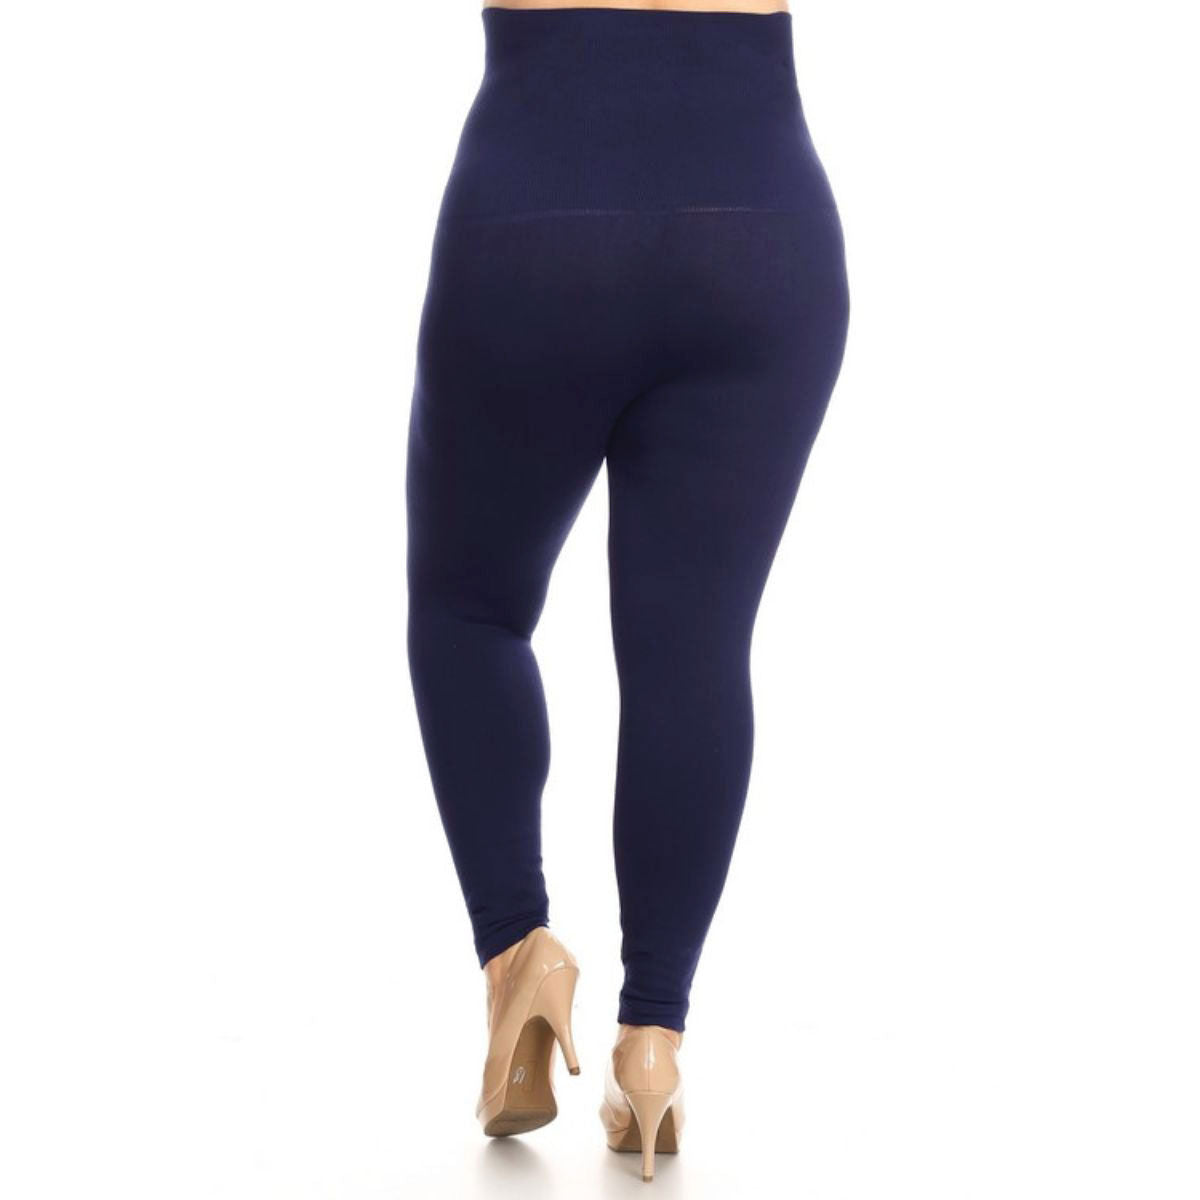 Update more than 233 navy blue leggings plus size latest